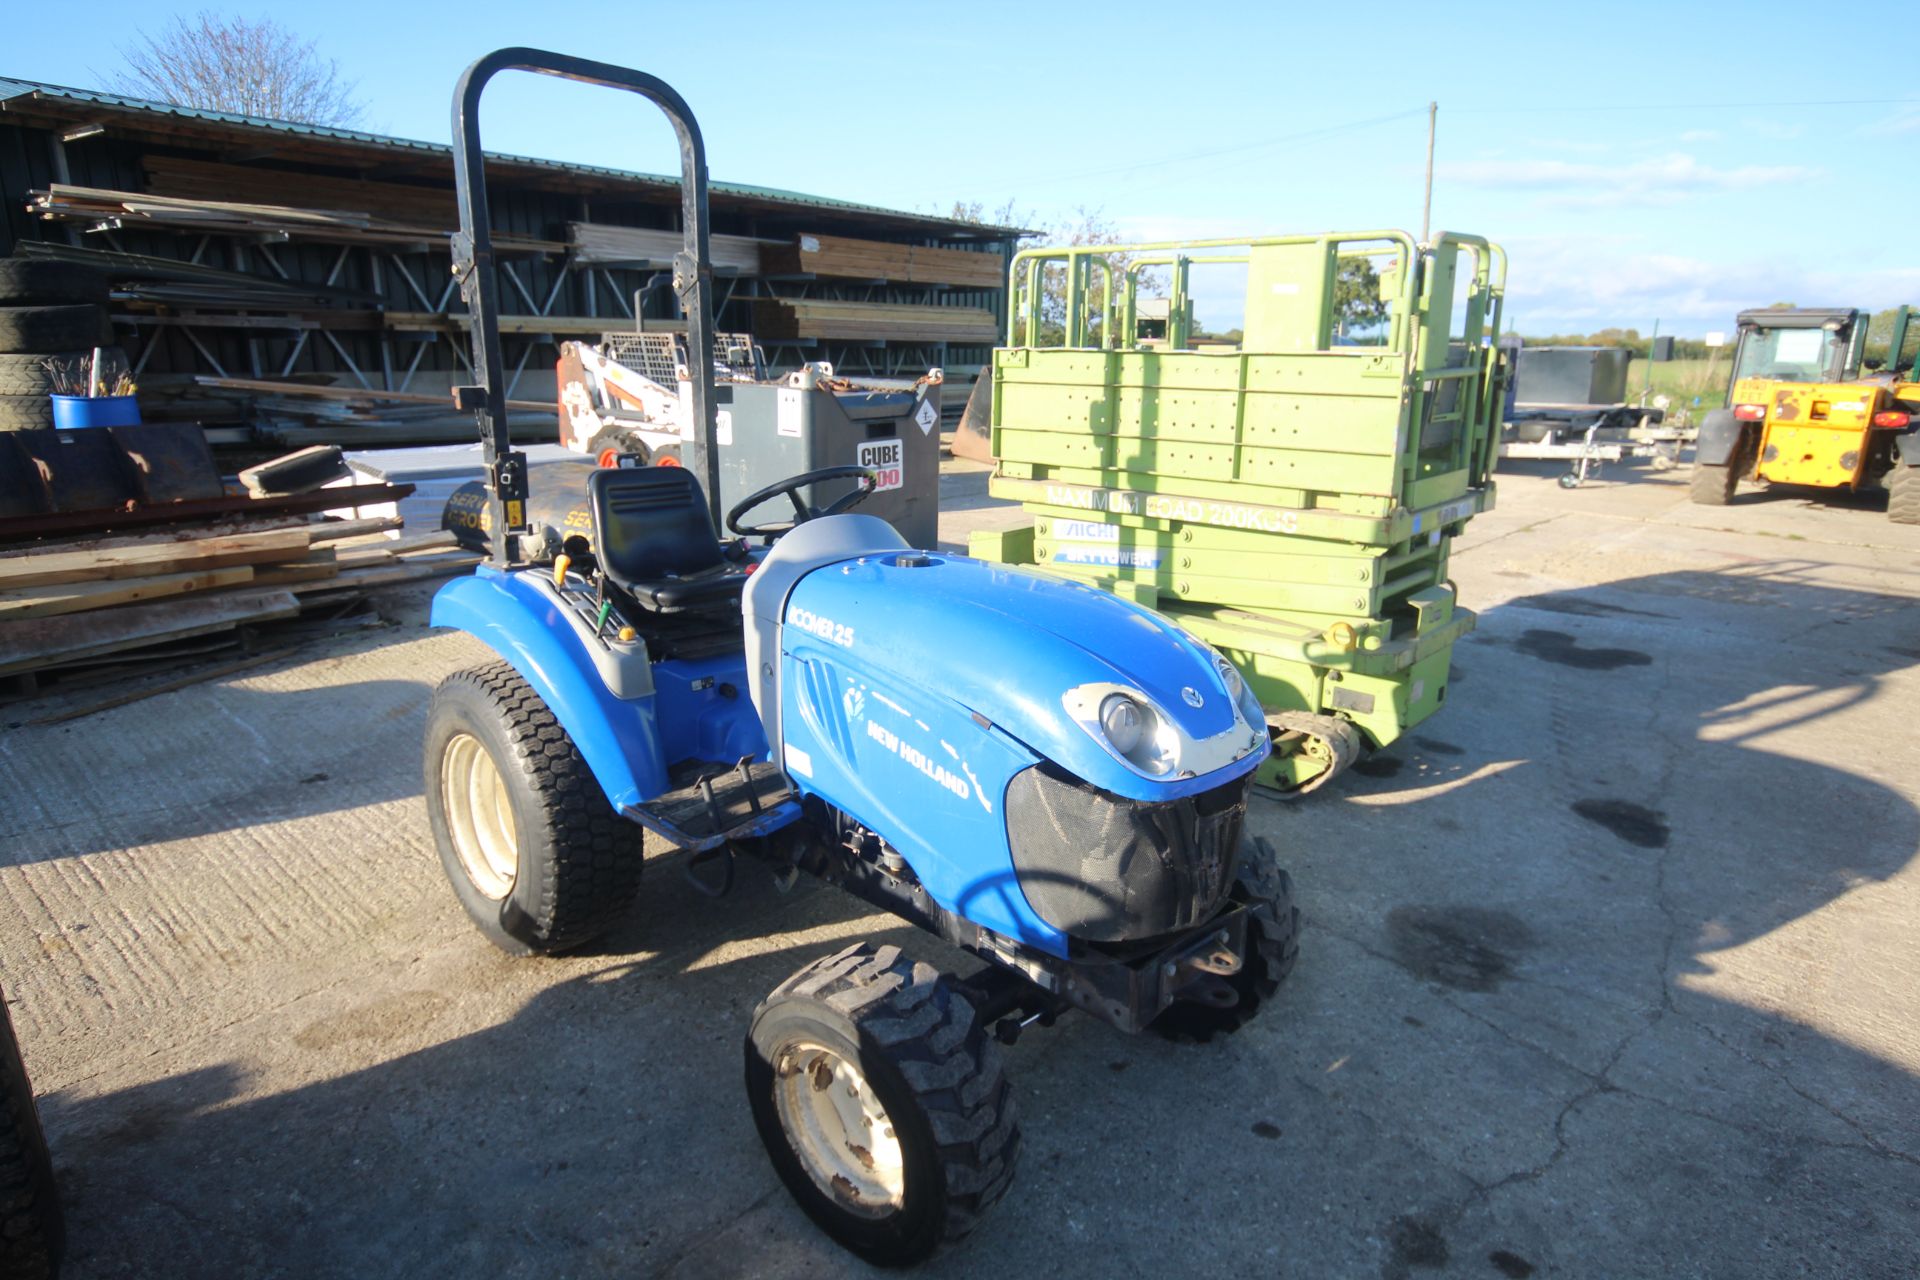 **UPDATED DESCRIPTION** New Holland Boomer 25 4WD compact tractor. Registration AY17 AHF. Date of